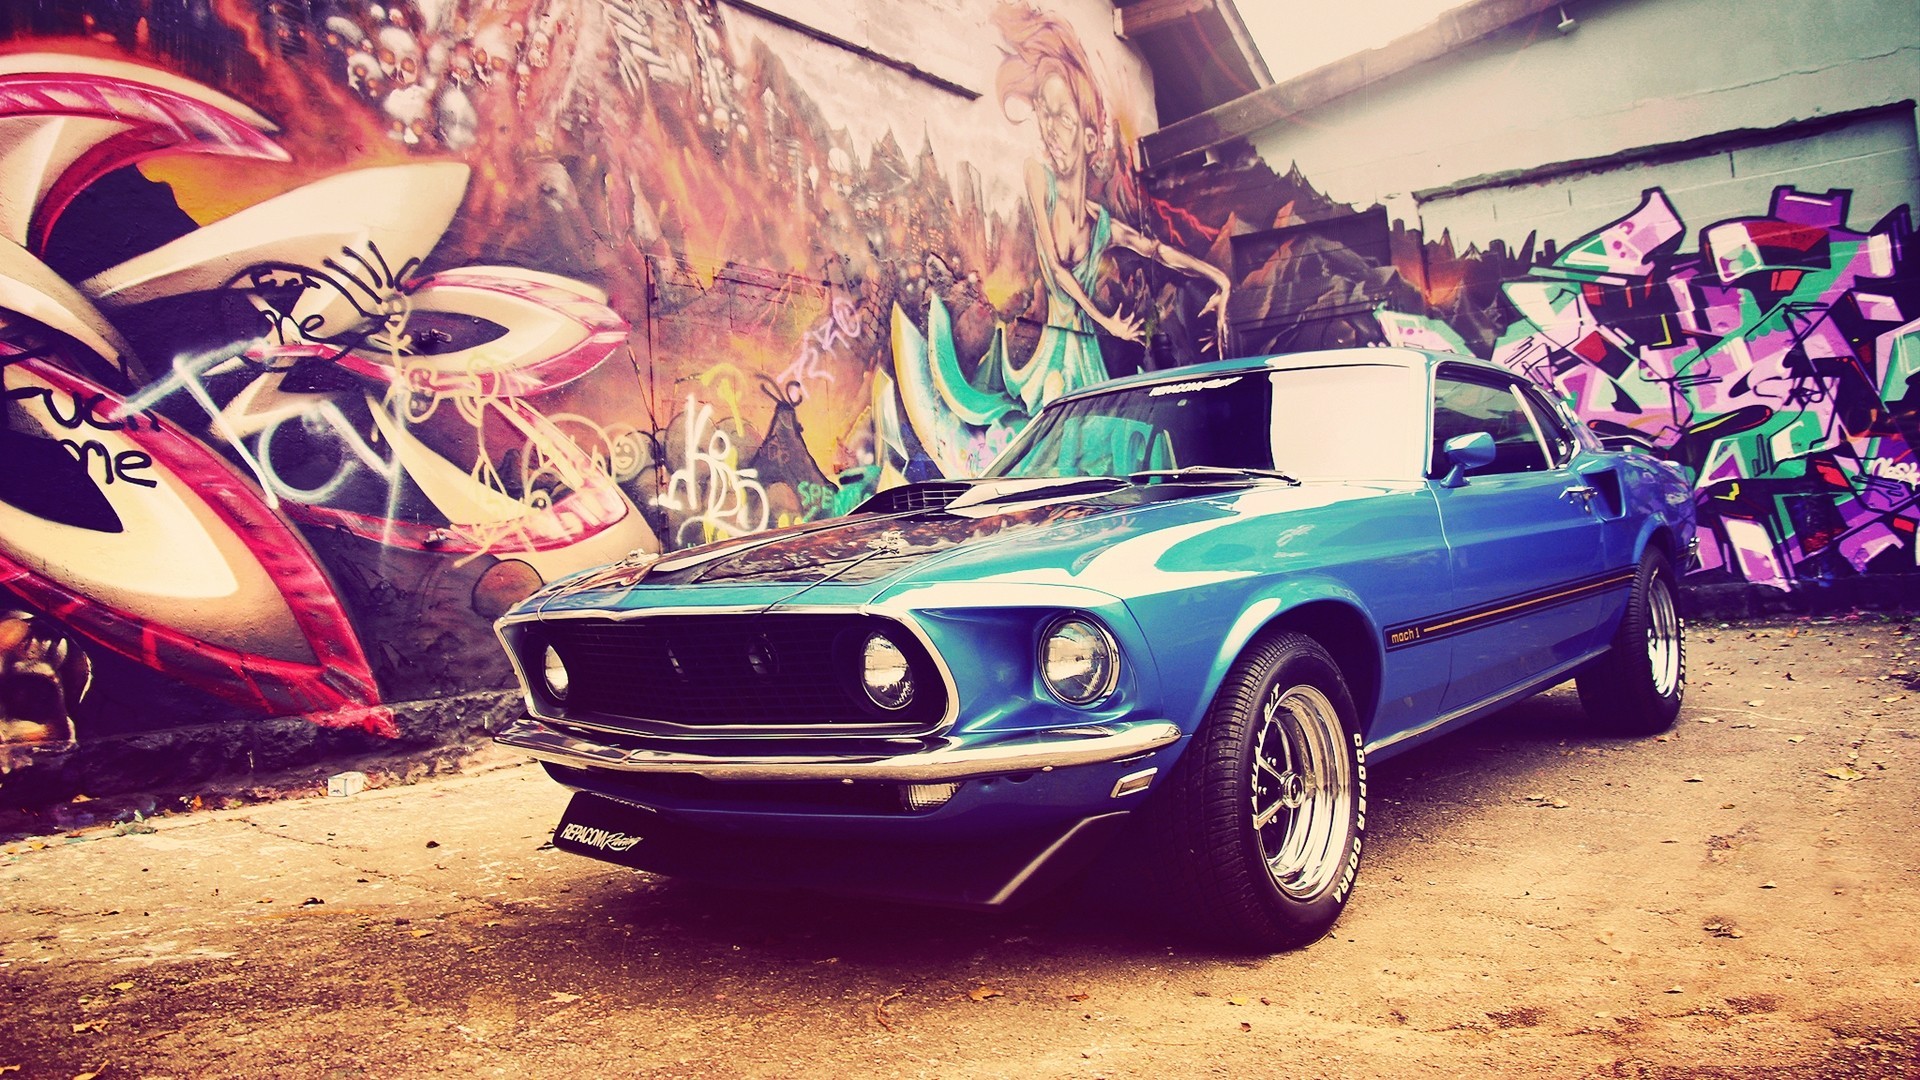 Ford Mustang Mach 1, Muscle Cars, Car, Ford, Ford Mustang, Shelby GT500, Blue Cars, Graffiti Wallpaper